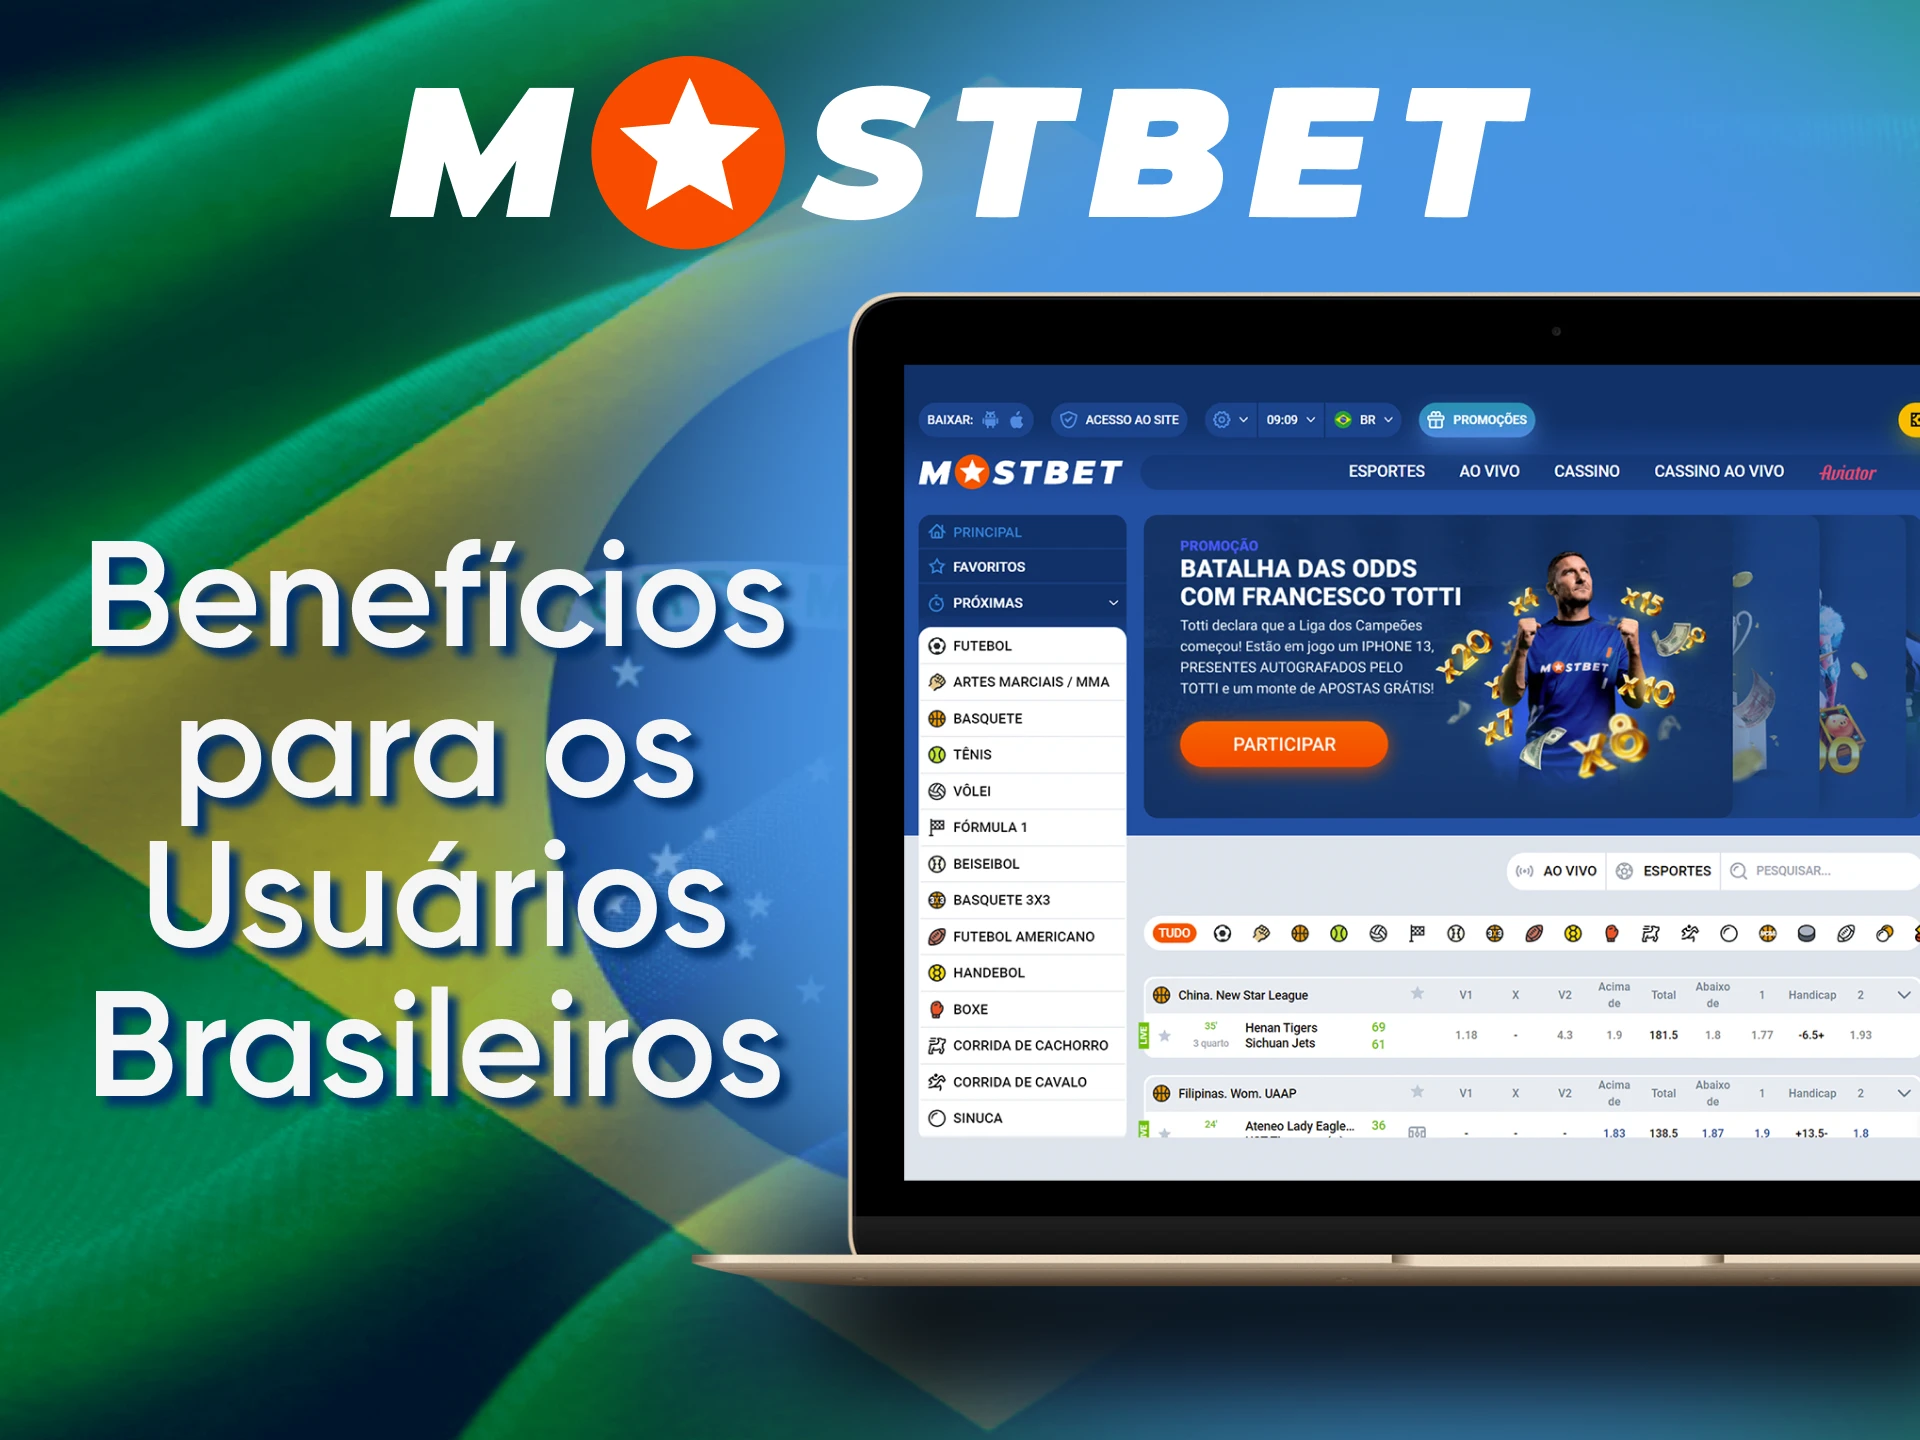 The official website of Mostbet offers many benefits for Brazilian users.